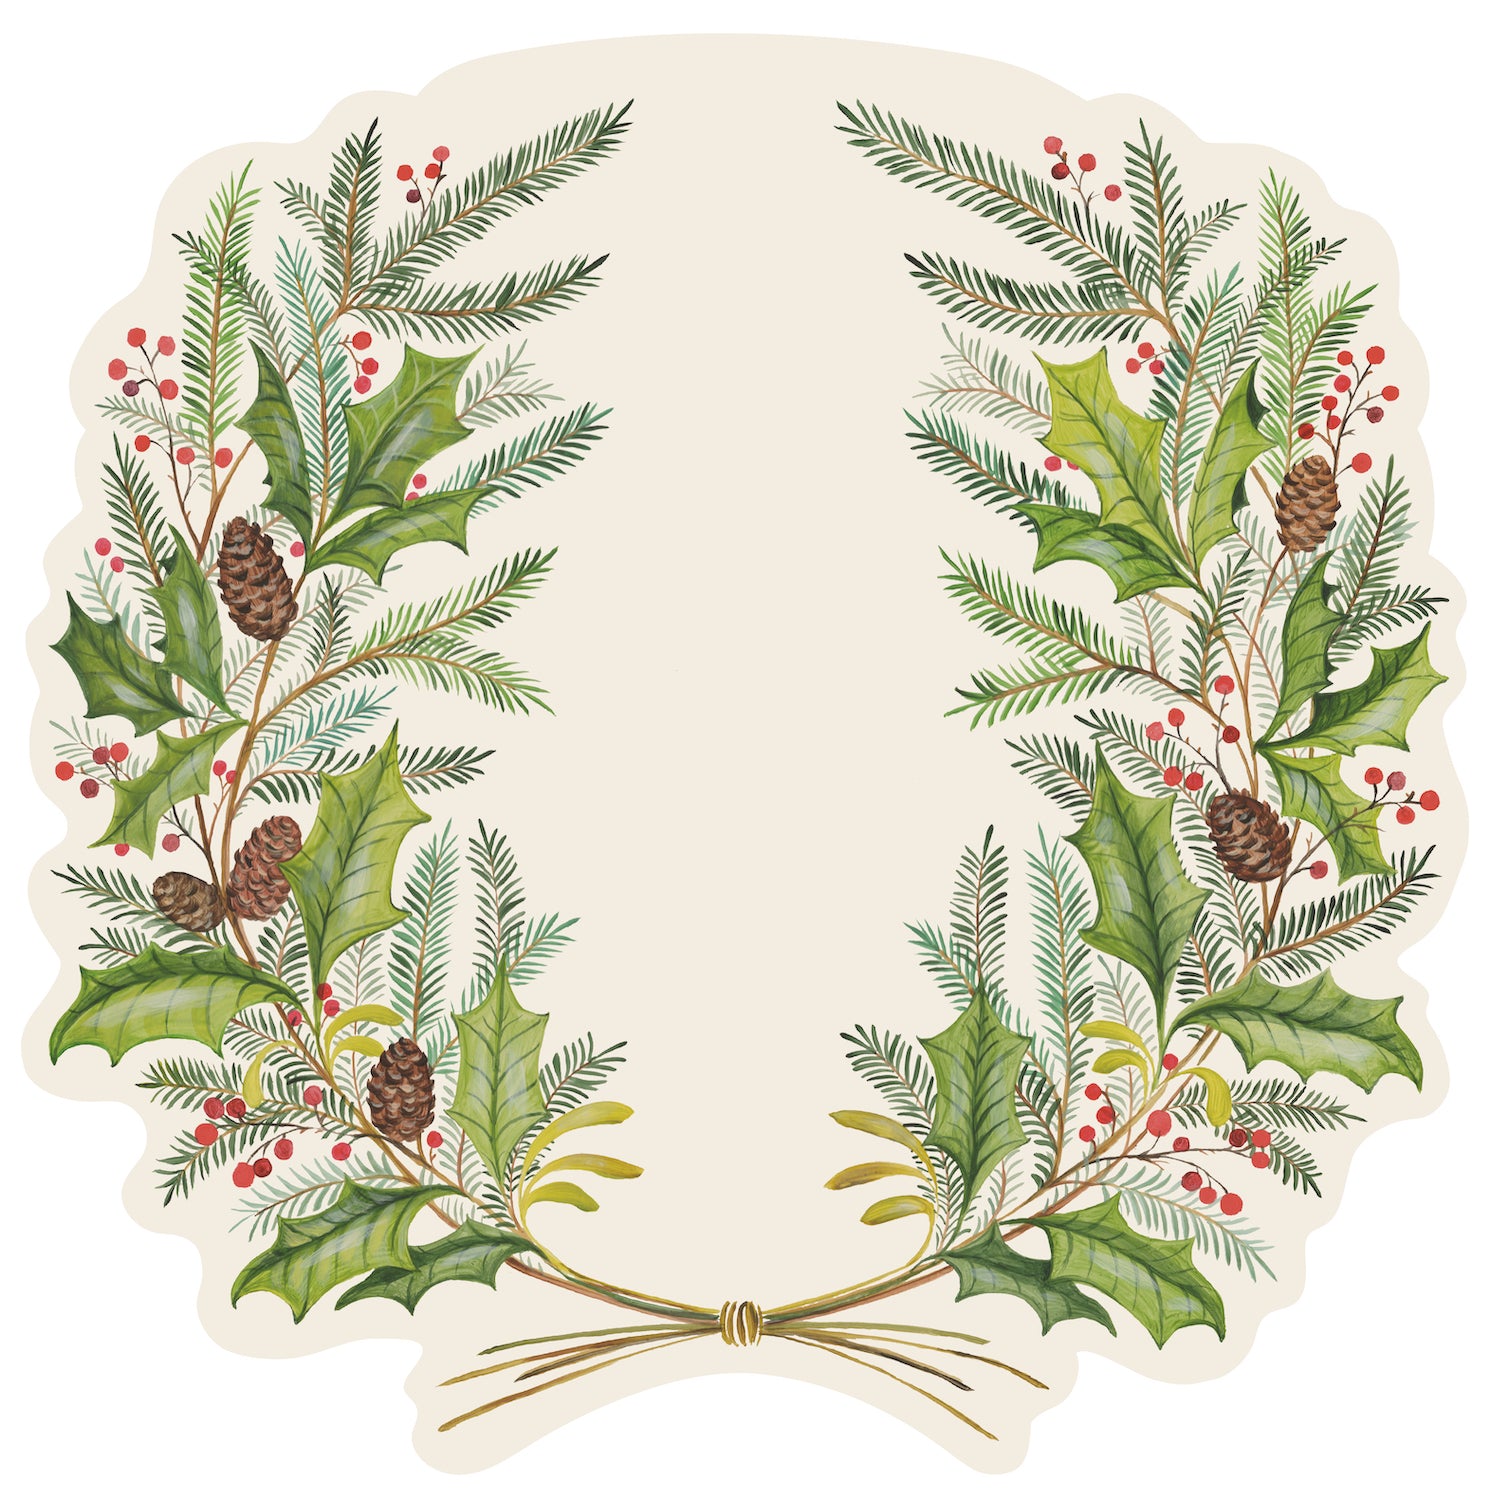 An illustrated symmetrical wreath of evergreen sprigs and holly with red berries and pinecones, stems tied together at the bottom, leaving an open white background in the middle.